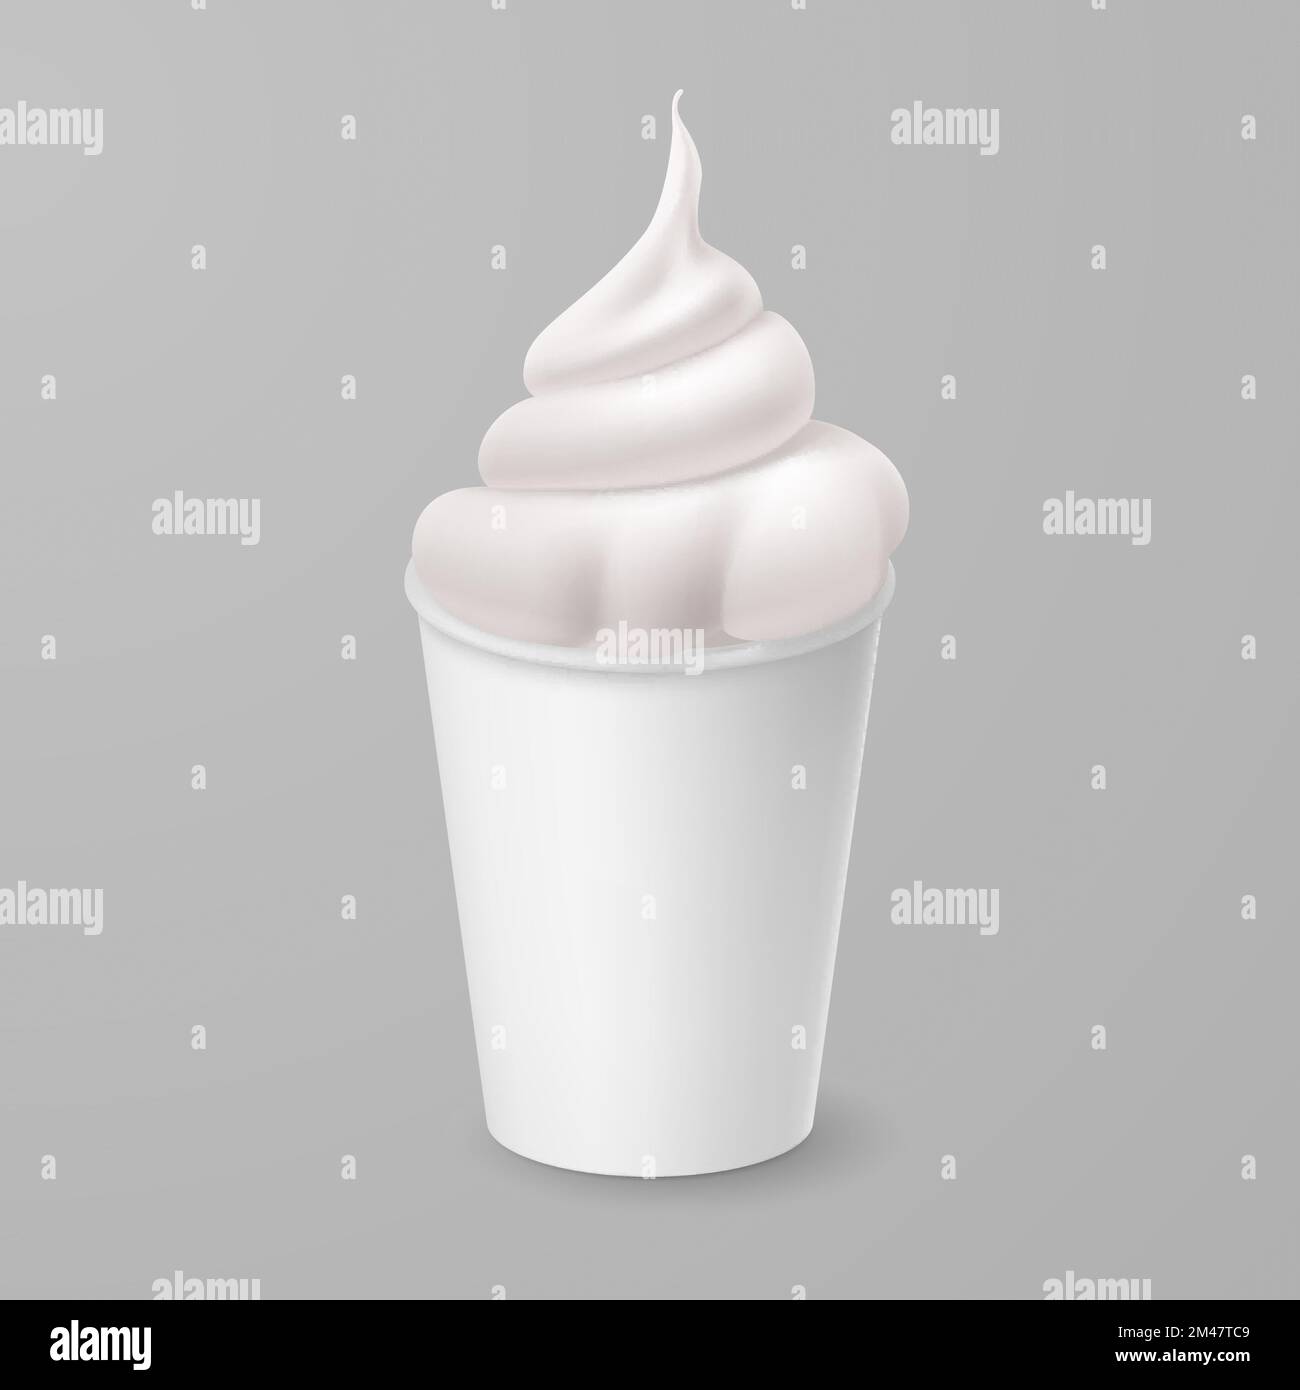 Whipped Vanilla Frozen Yogurt or Soft Ice Cream in White Cardboard Cup. Isolated Illustration on Gray Background Stock Vector